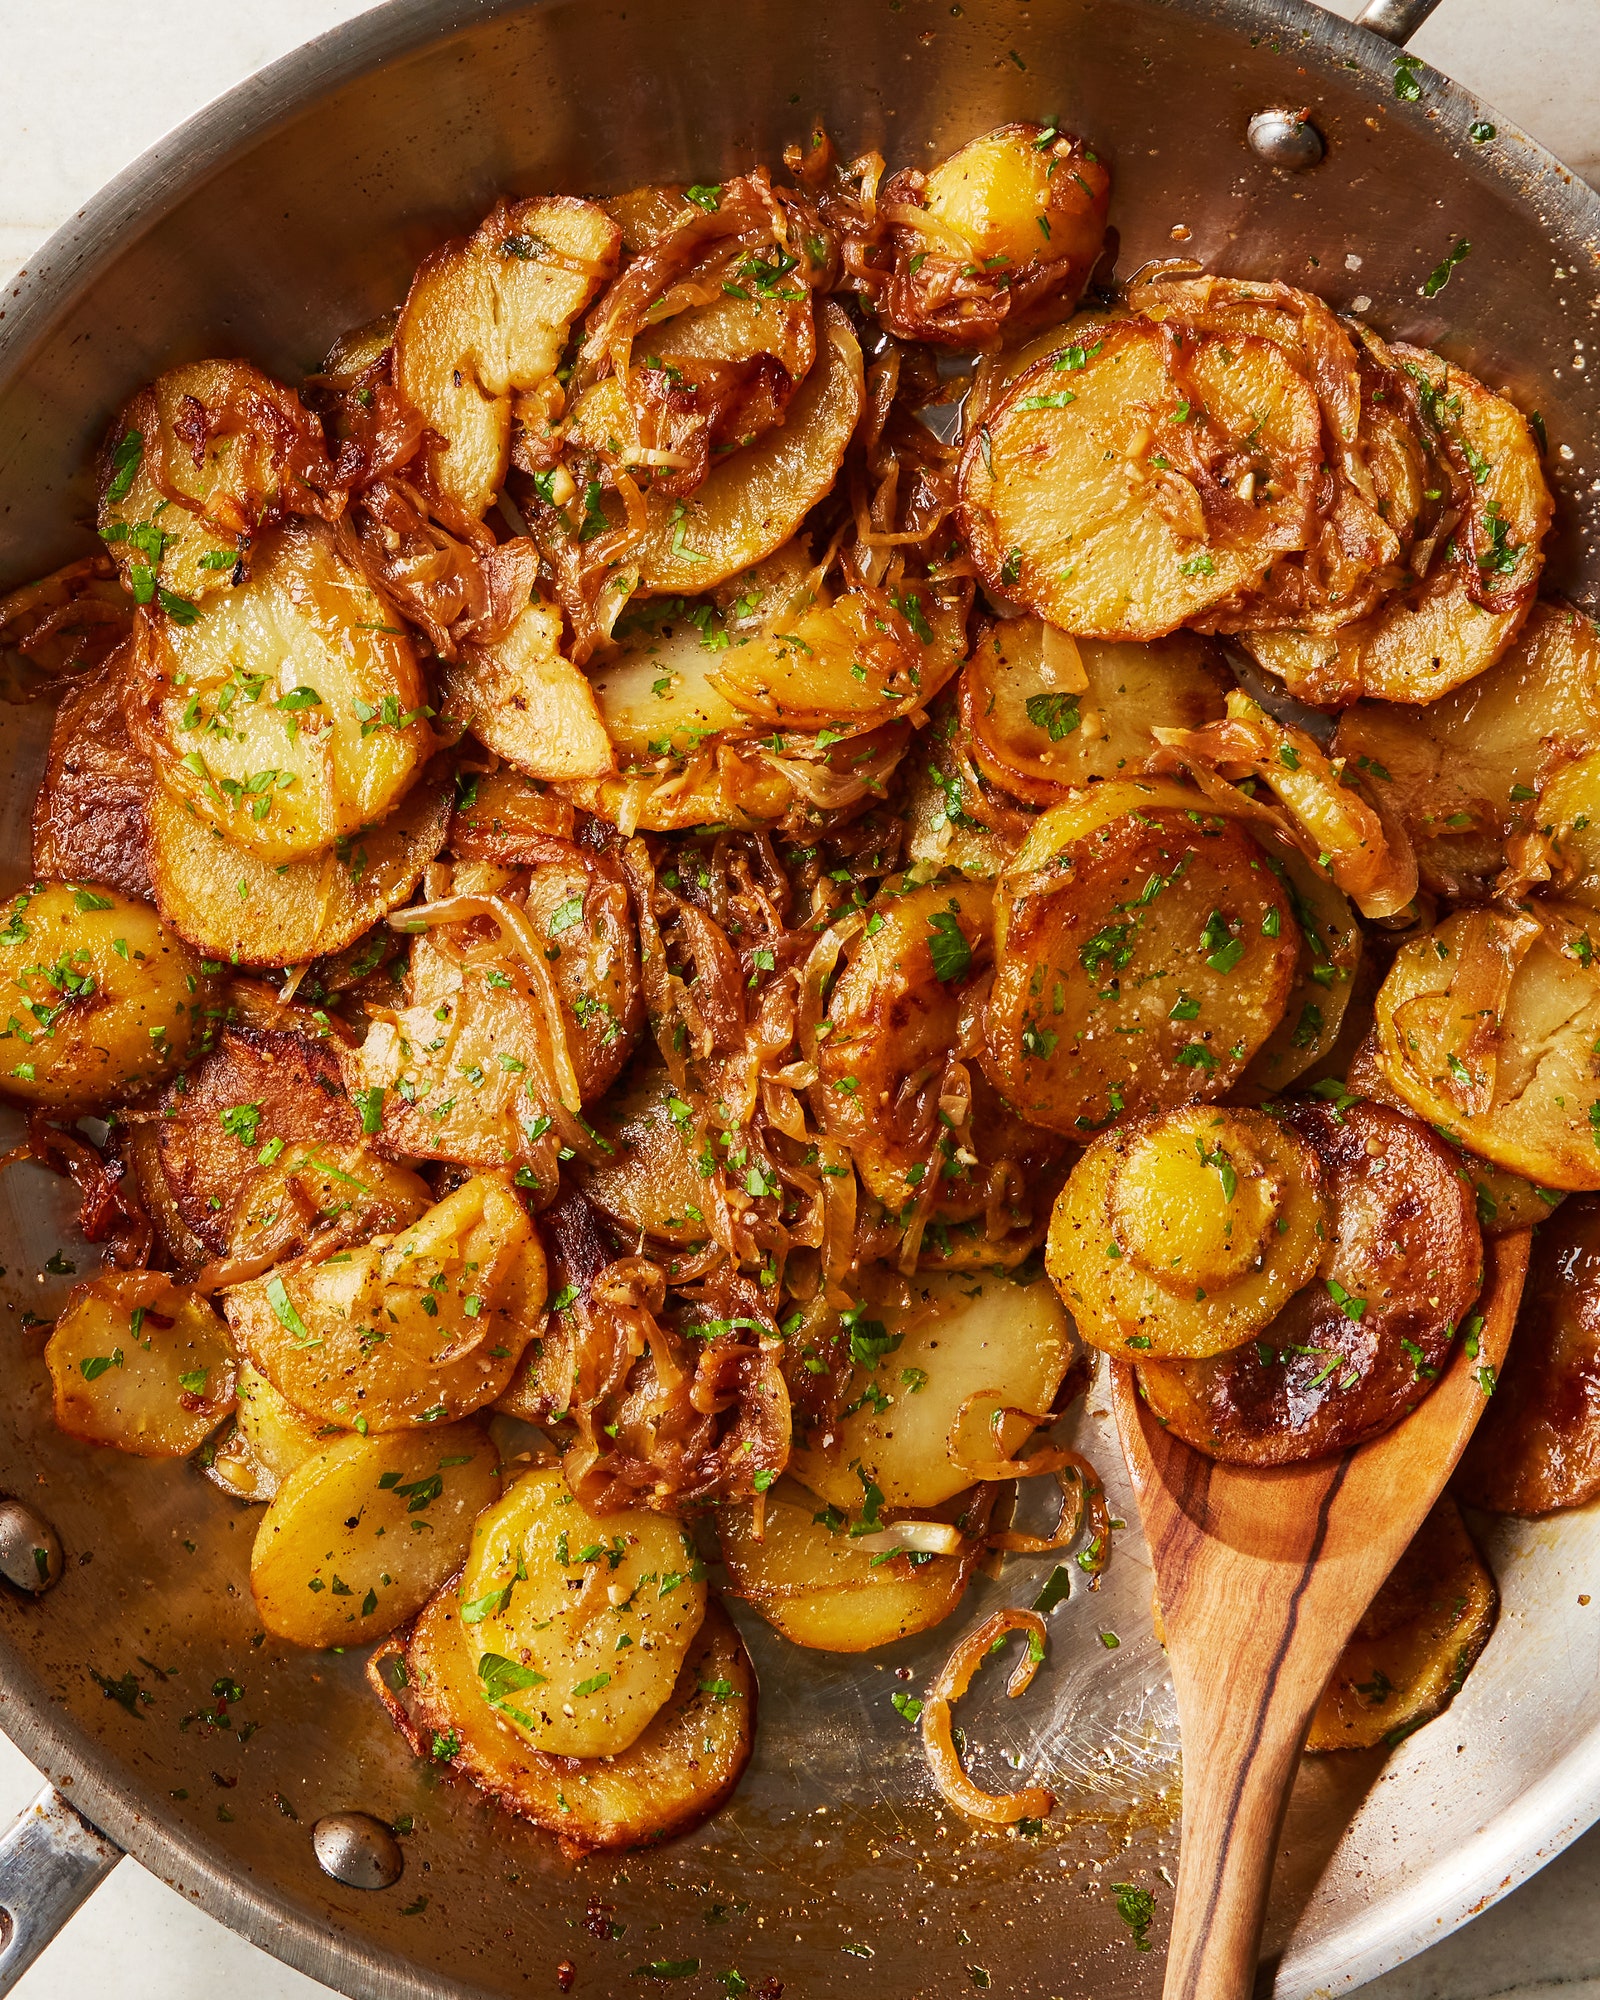 Sliced potatoes in a pan with caramelized onions and fresh parsley.